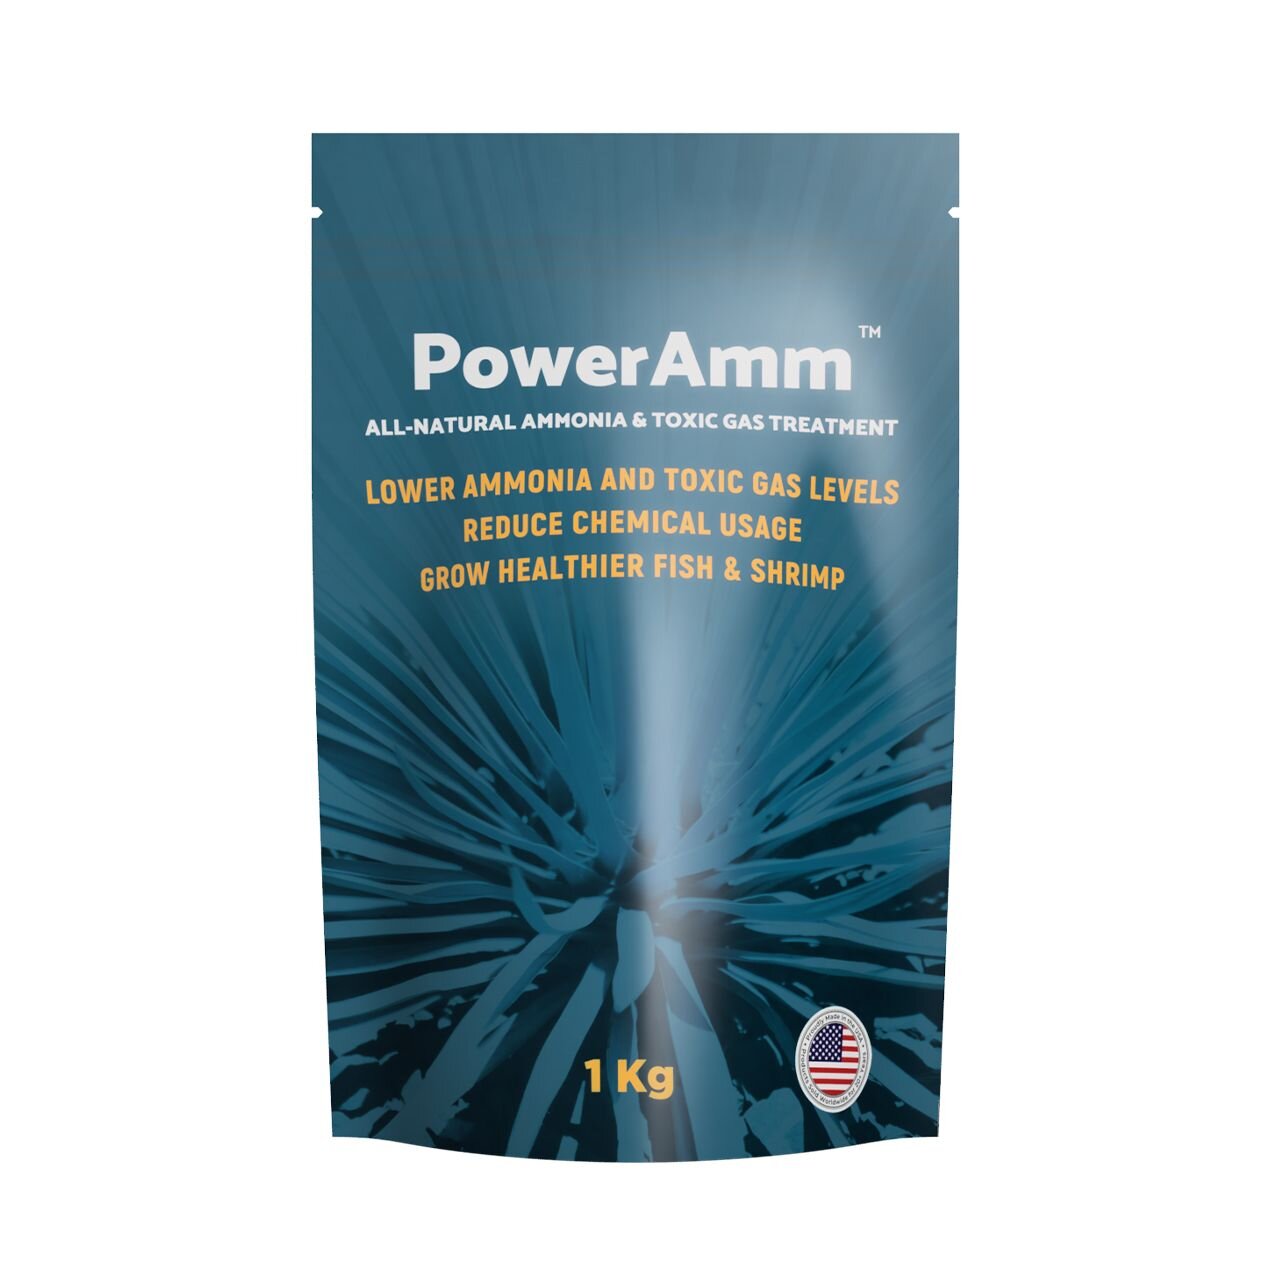 PowerAmm™ Packaging - Ammonia control for shrimp and fish